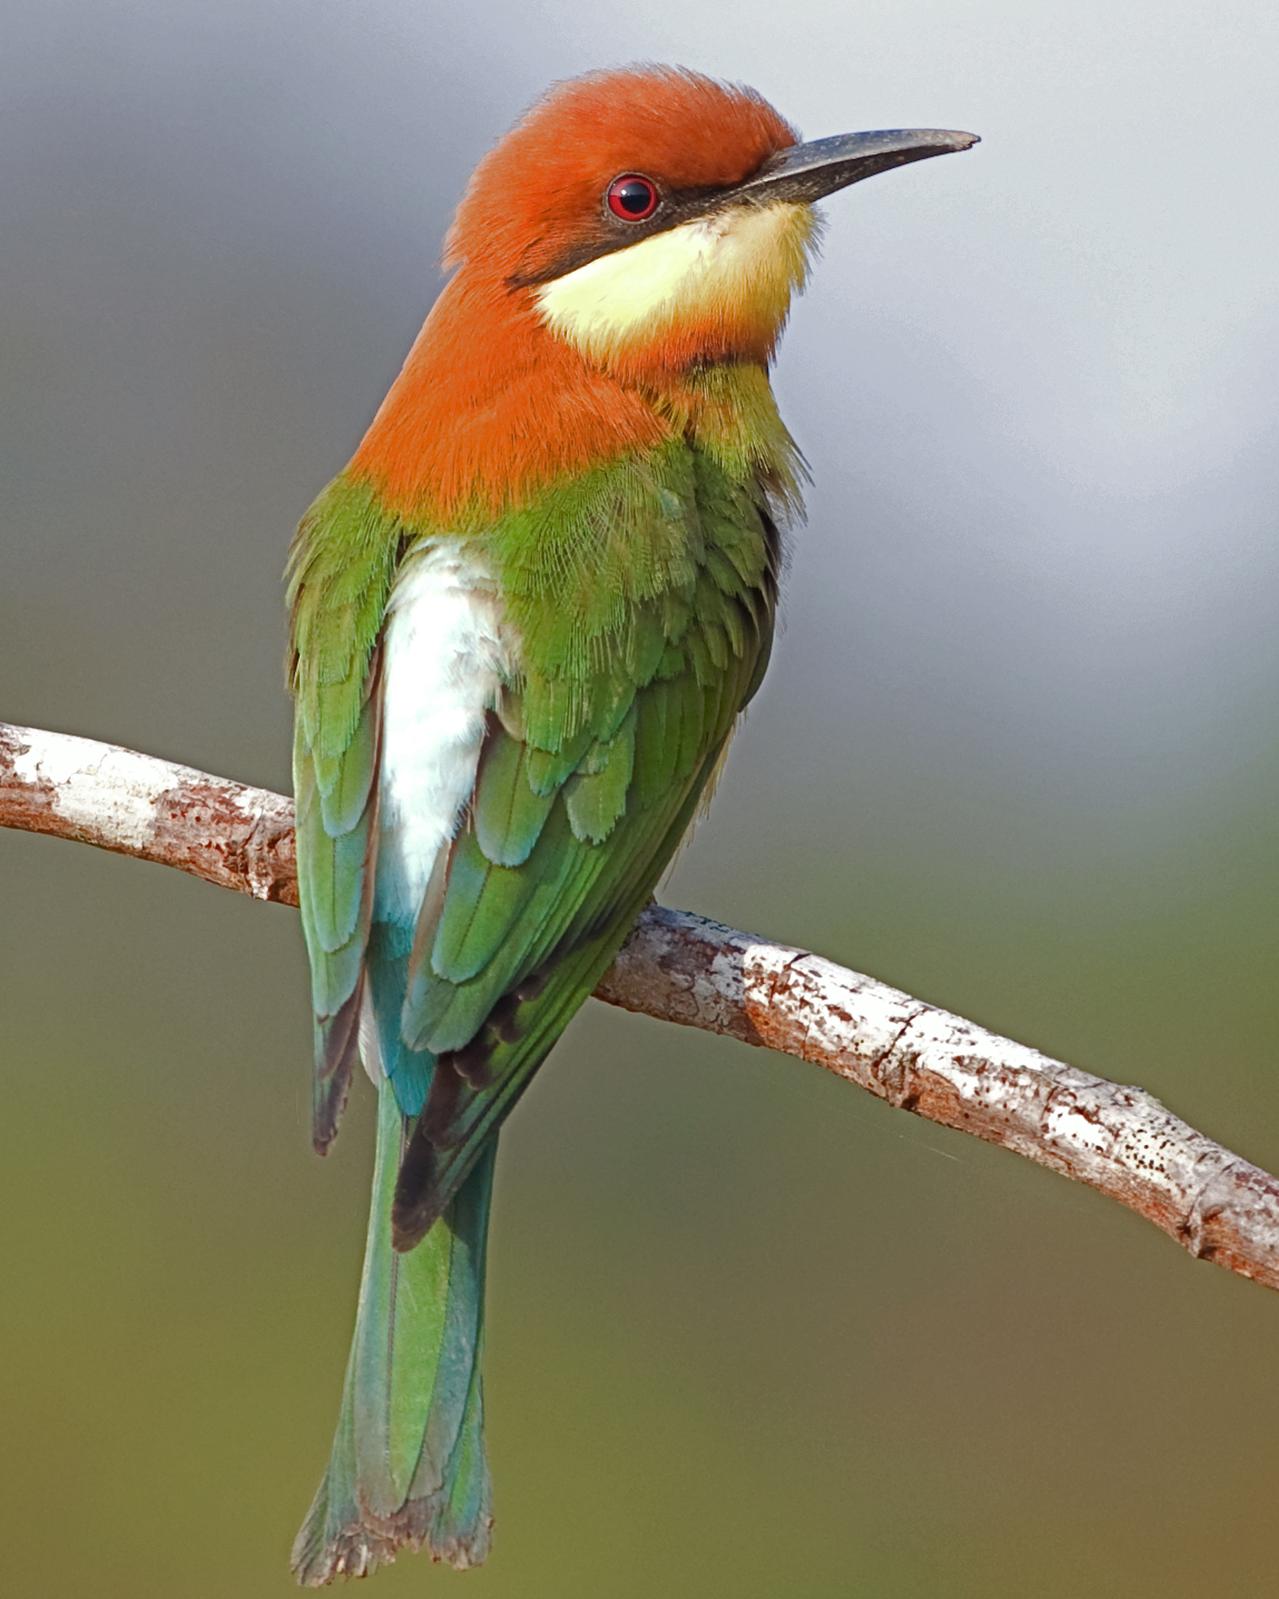 Chestnut-headed Bee-eater Photo by Alex Vargas